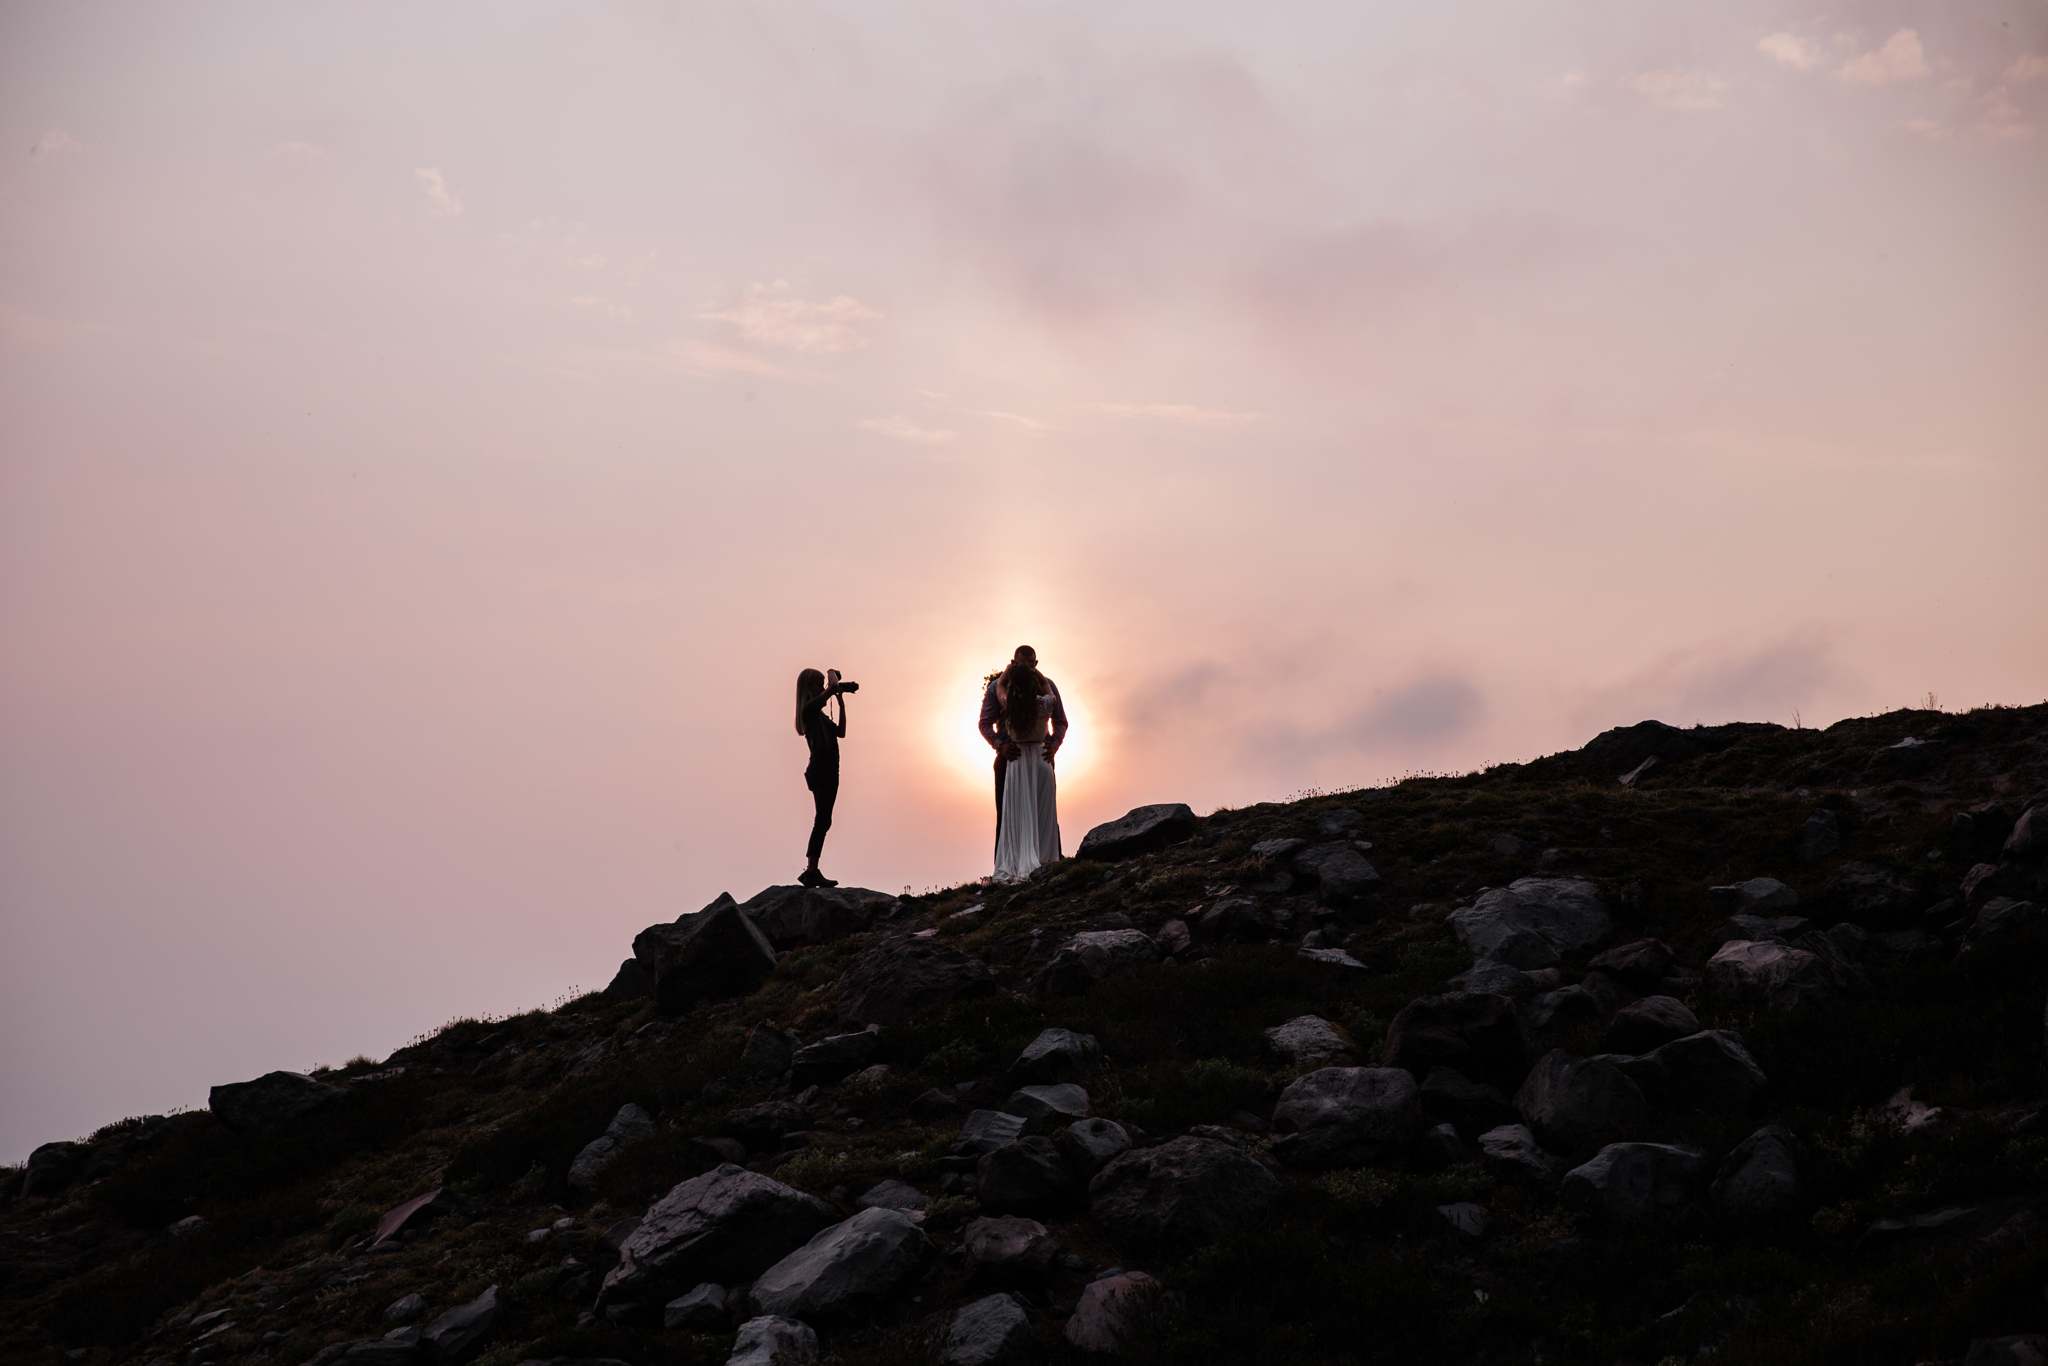 shooting an elopement in mount rainier national park | utah and california adventure elopement photographers | the hearnes adventure photography | www.thehearnes.com